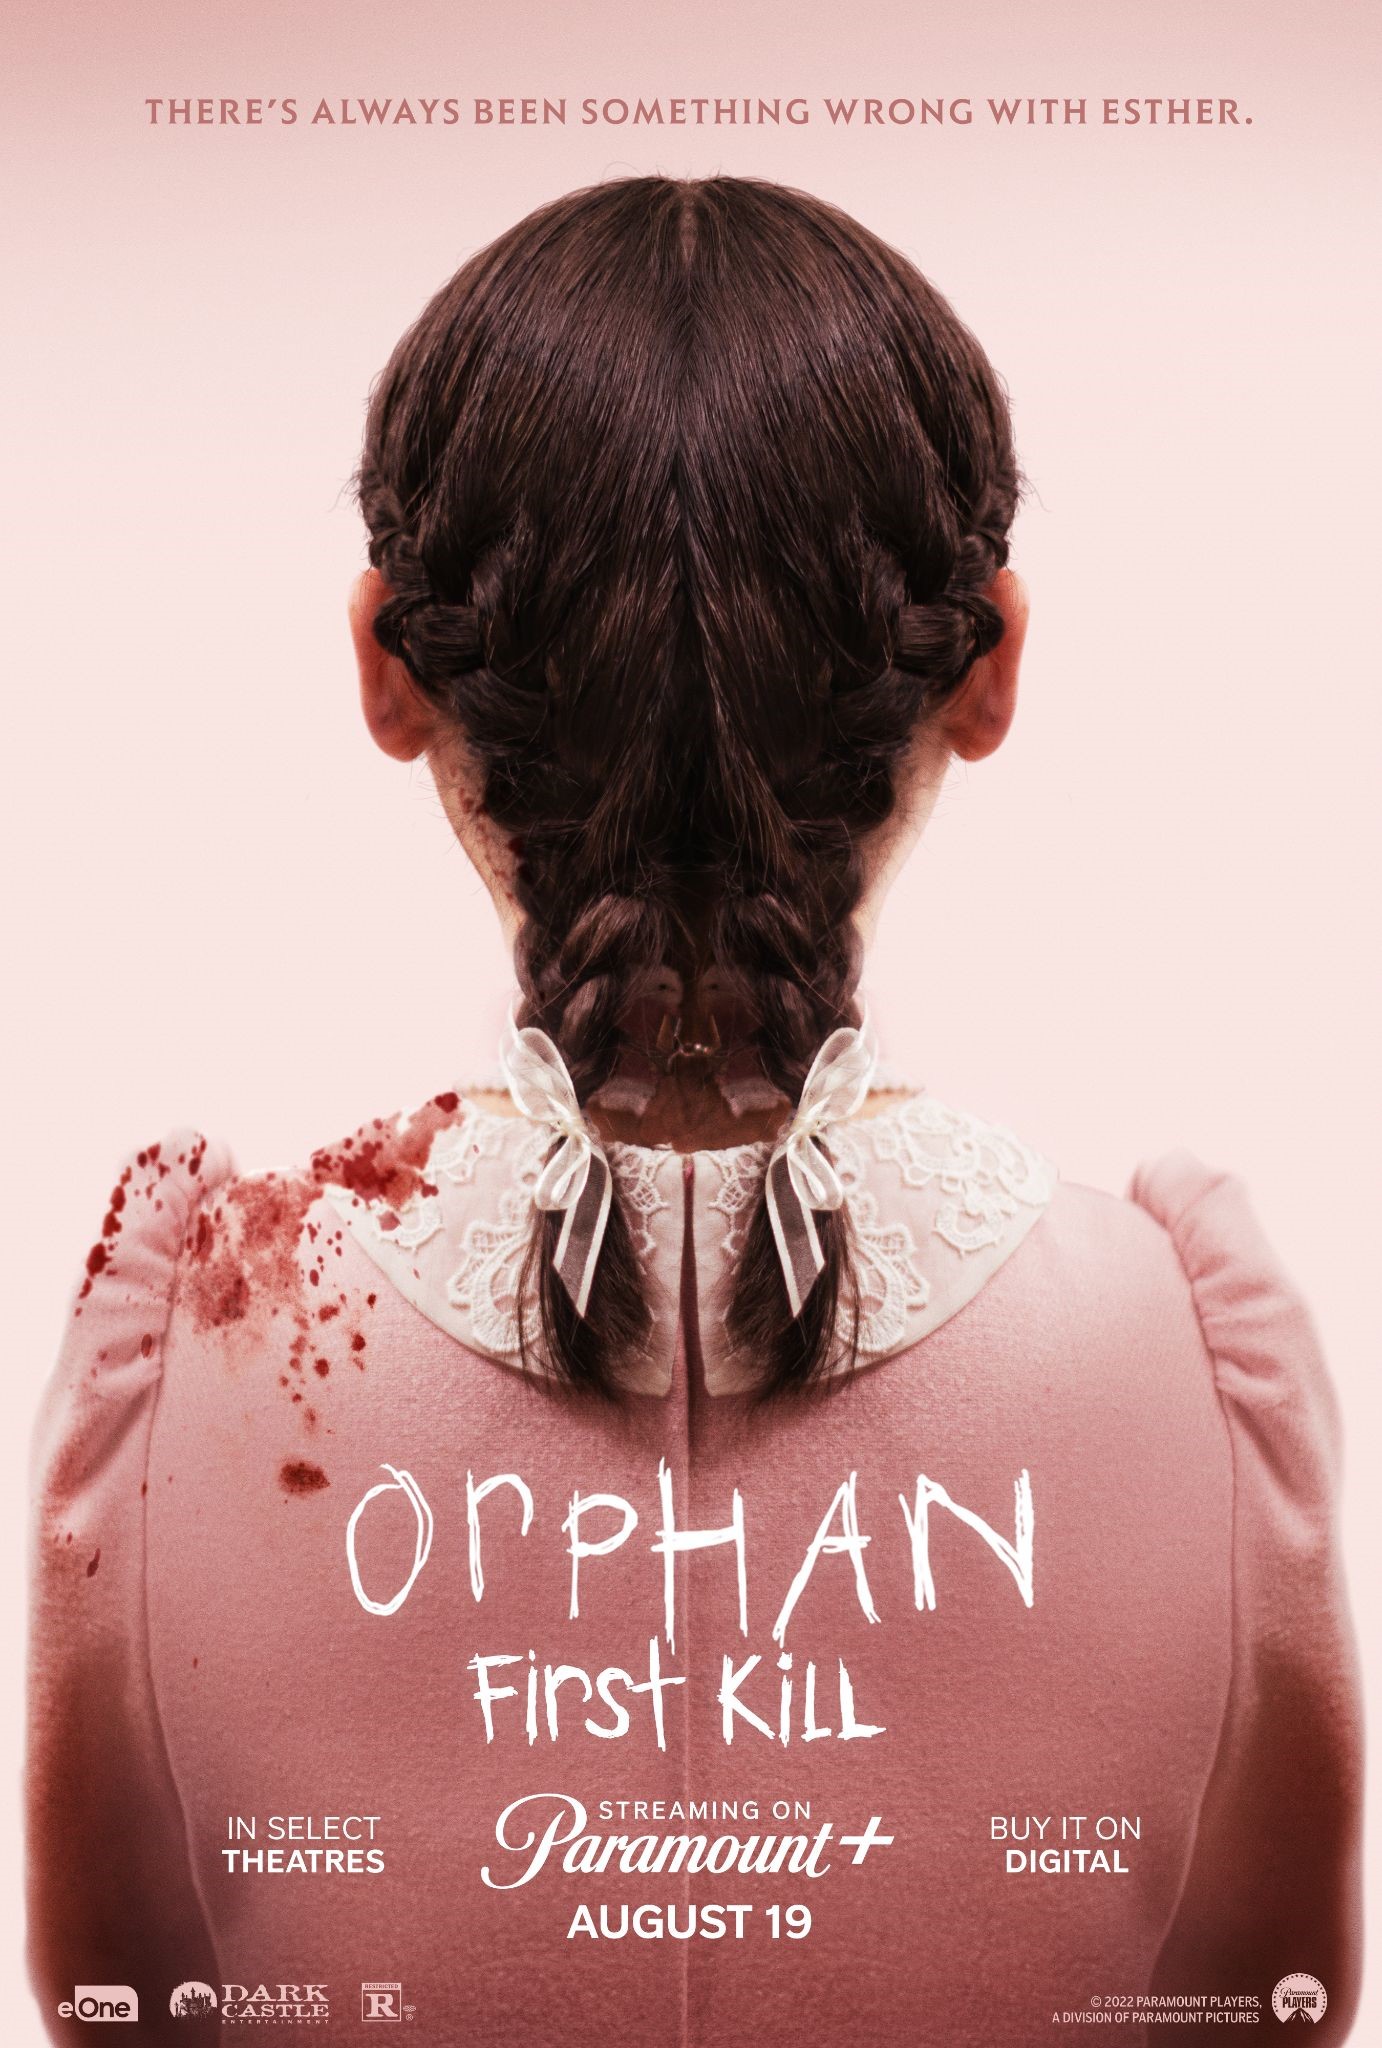 Trailer For Prequel Orphan: First Kill - Promises Chills On Paramount Plus In August